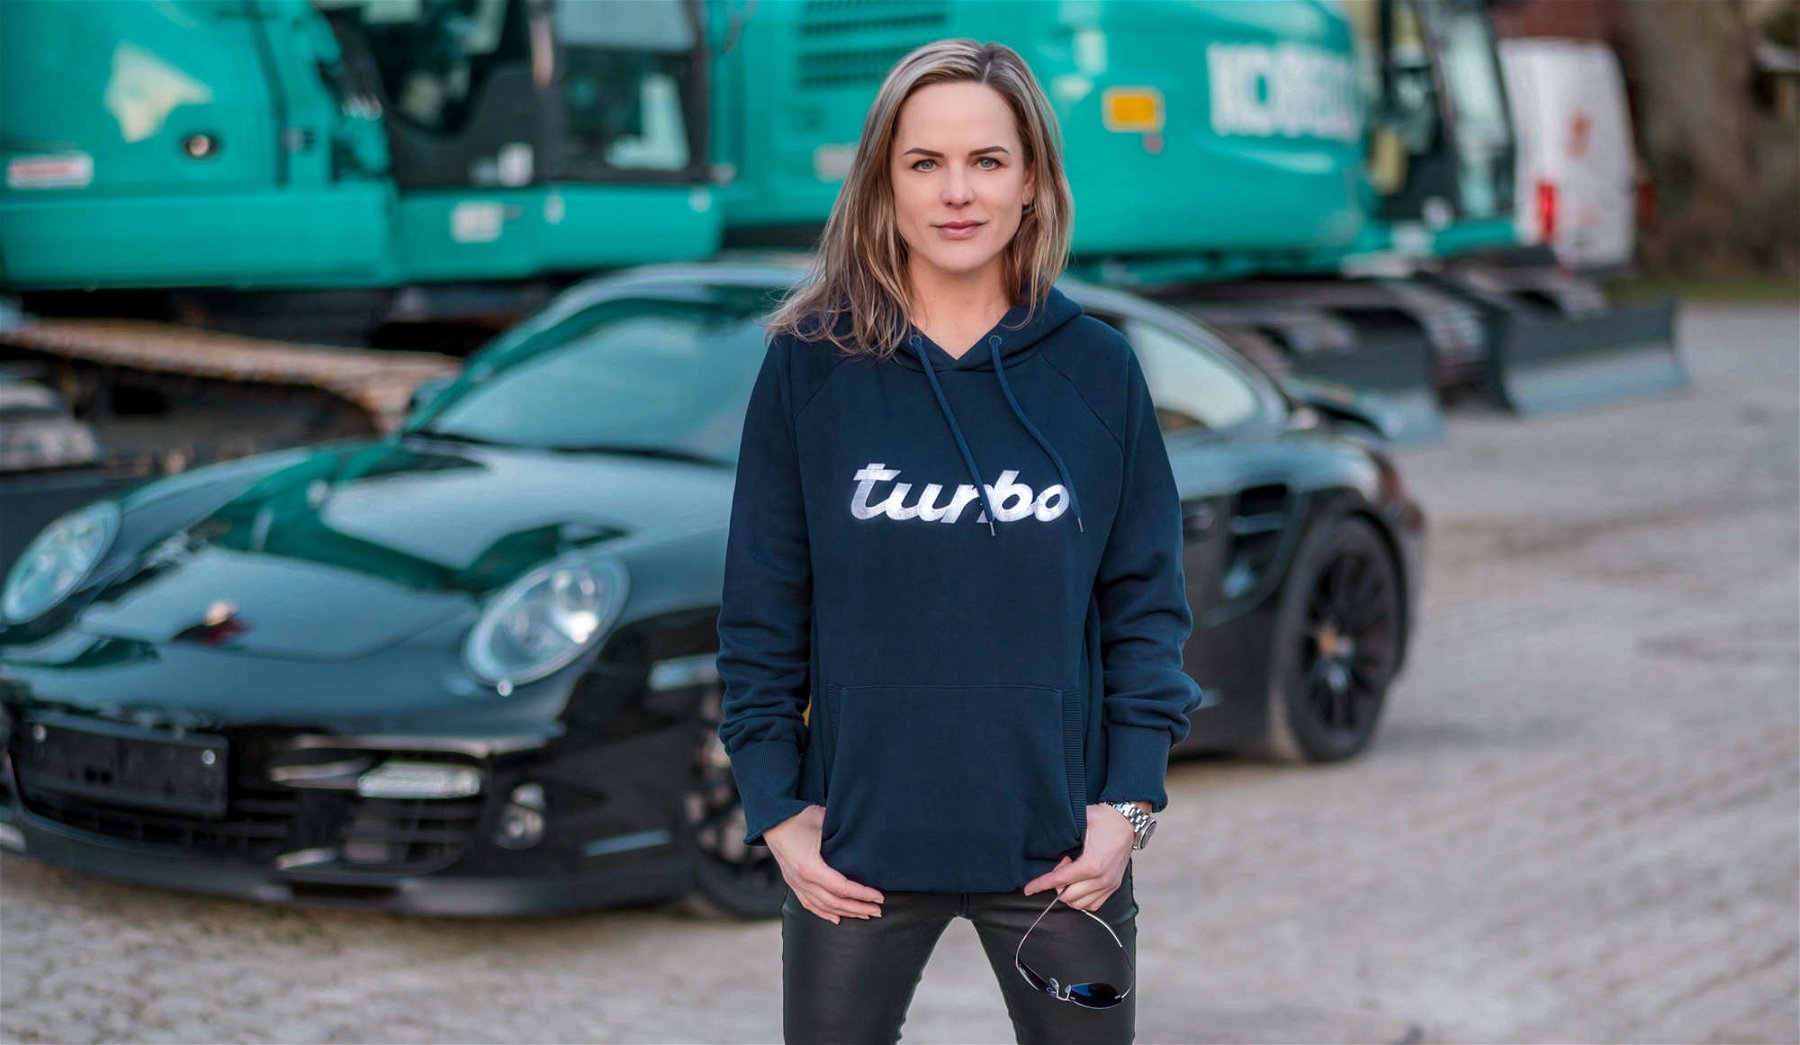 Nora – Small woman with attitude for fast cars